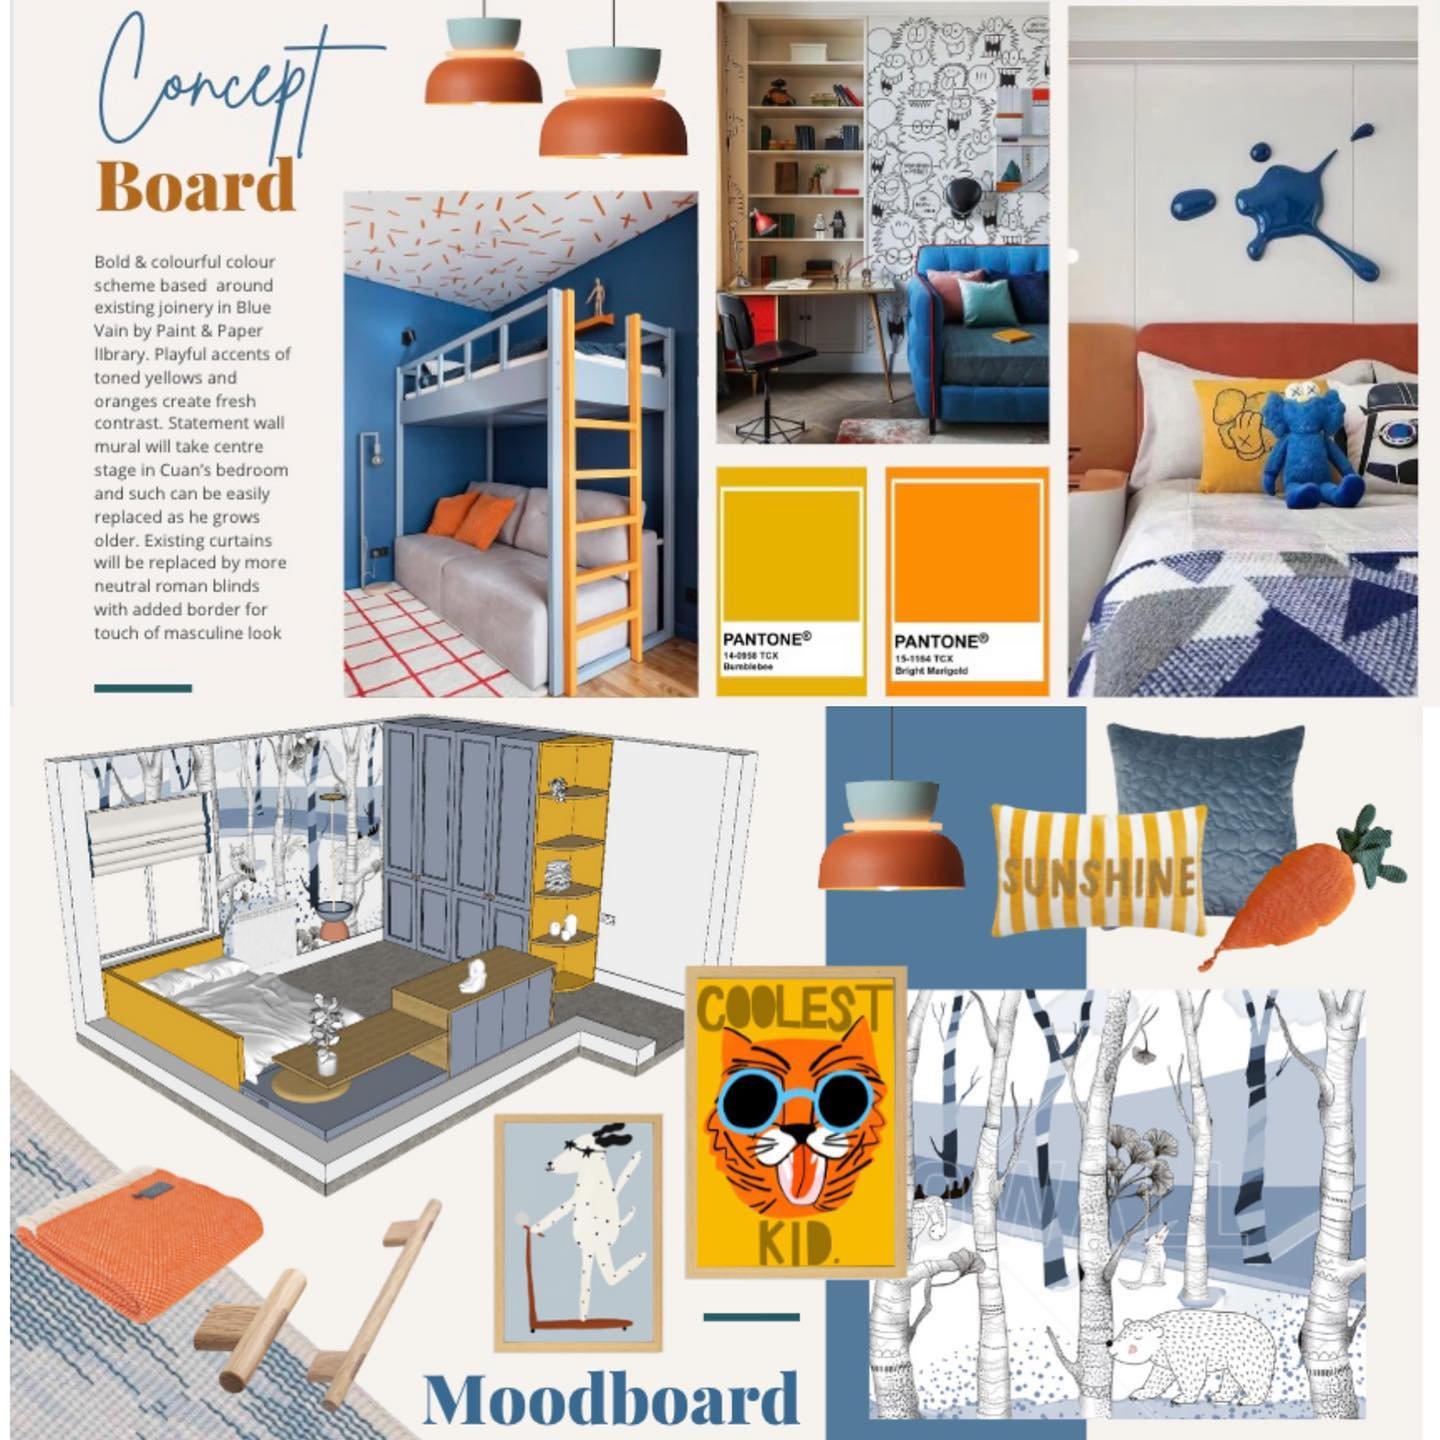 💥 Exciting project alert! All the way from London to Dublin &hellip; we are transforming this little boy&rsquo;s bedroom into a colorful wonderland using shades of yellow, orange, and blue! 

🟡🟠🔵 SWIPE TO SEE IN DETAIL

Let&rsquo;s take a look at